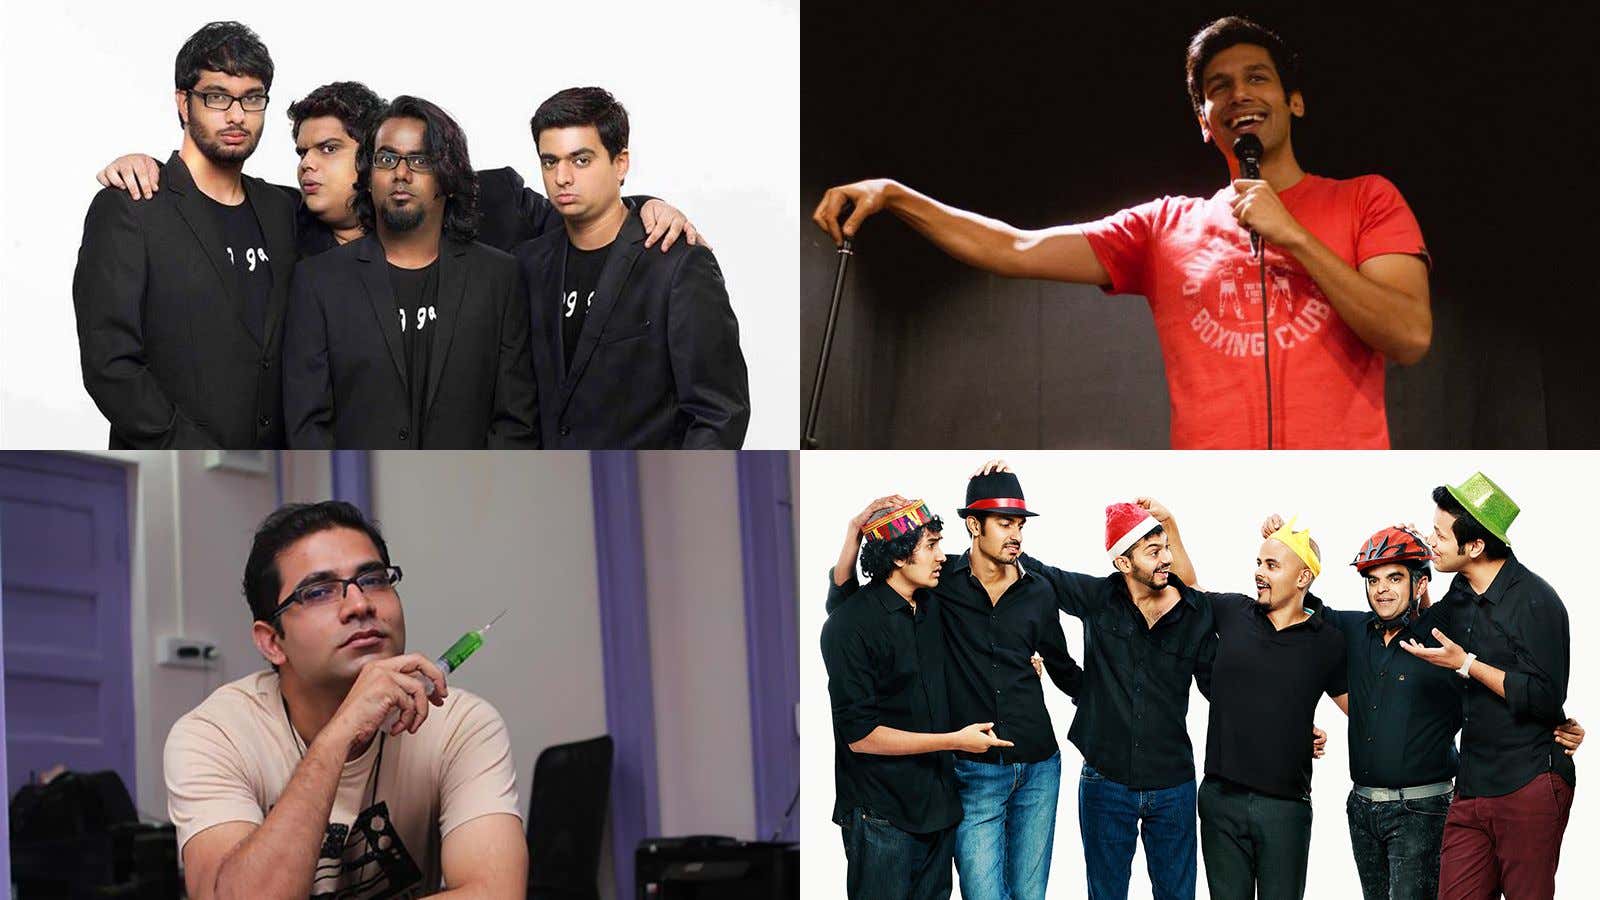 (Clockwise from top left) All India Bakchod, Kanan Gill, Arunabh Kumar and East India Comedy.